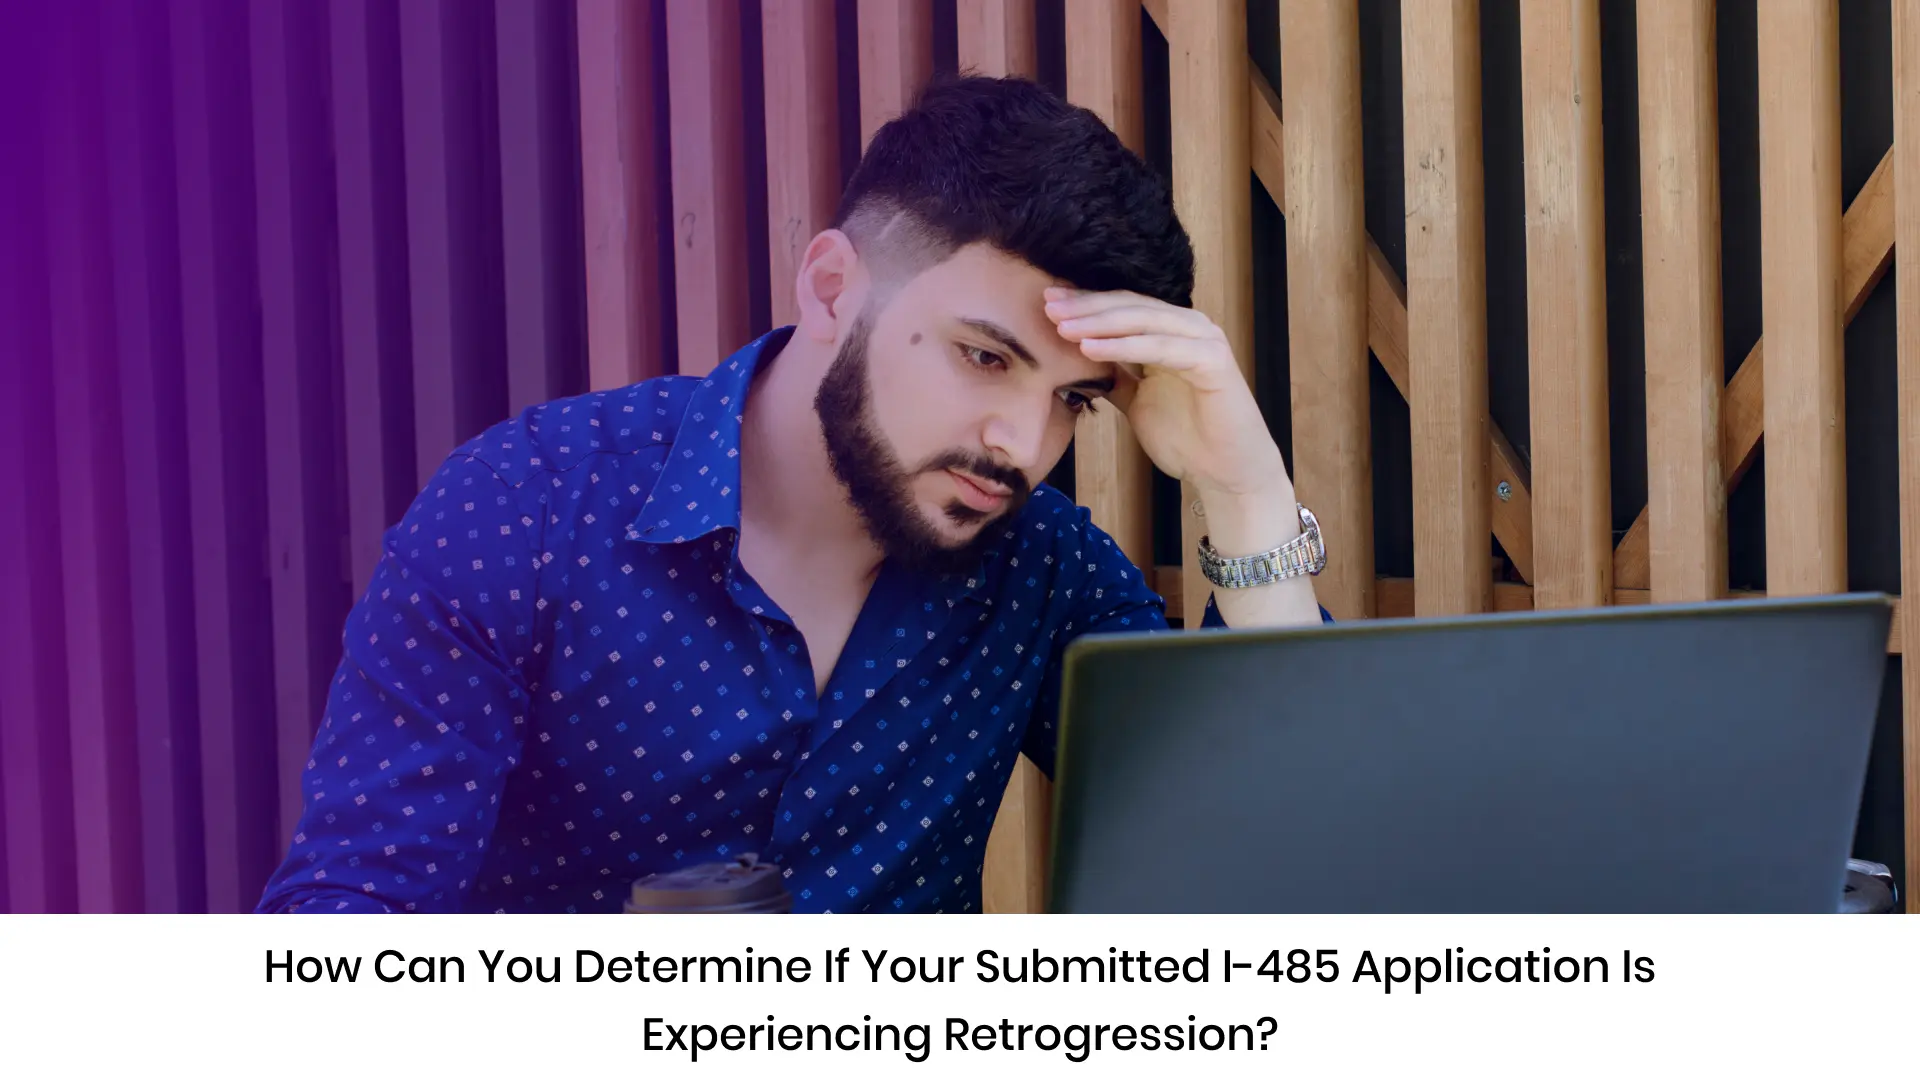 How Can you Determine If Your Submitted I-485 Application is Experiencing Retrogression?